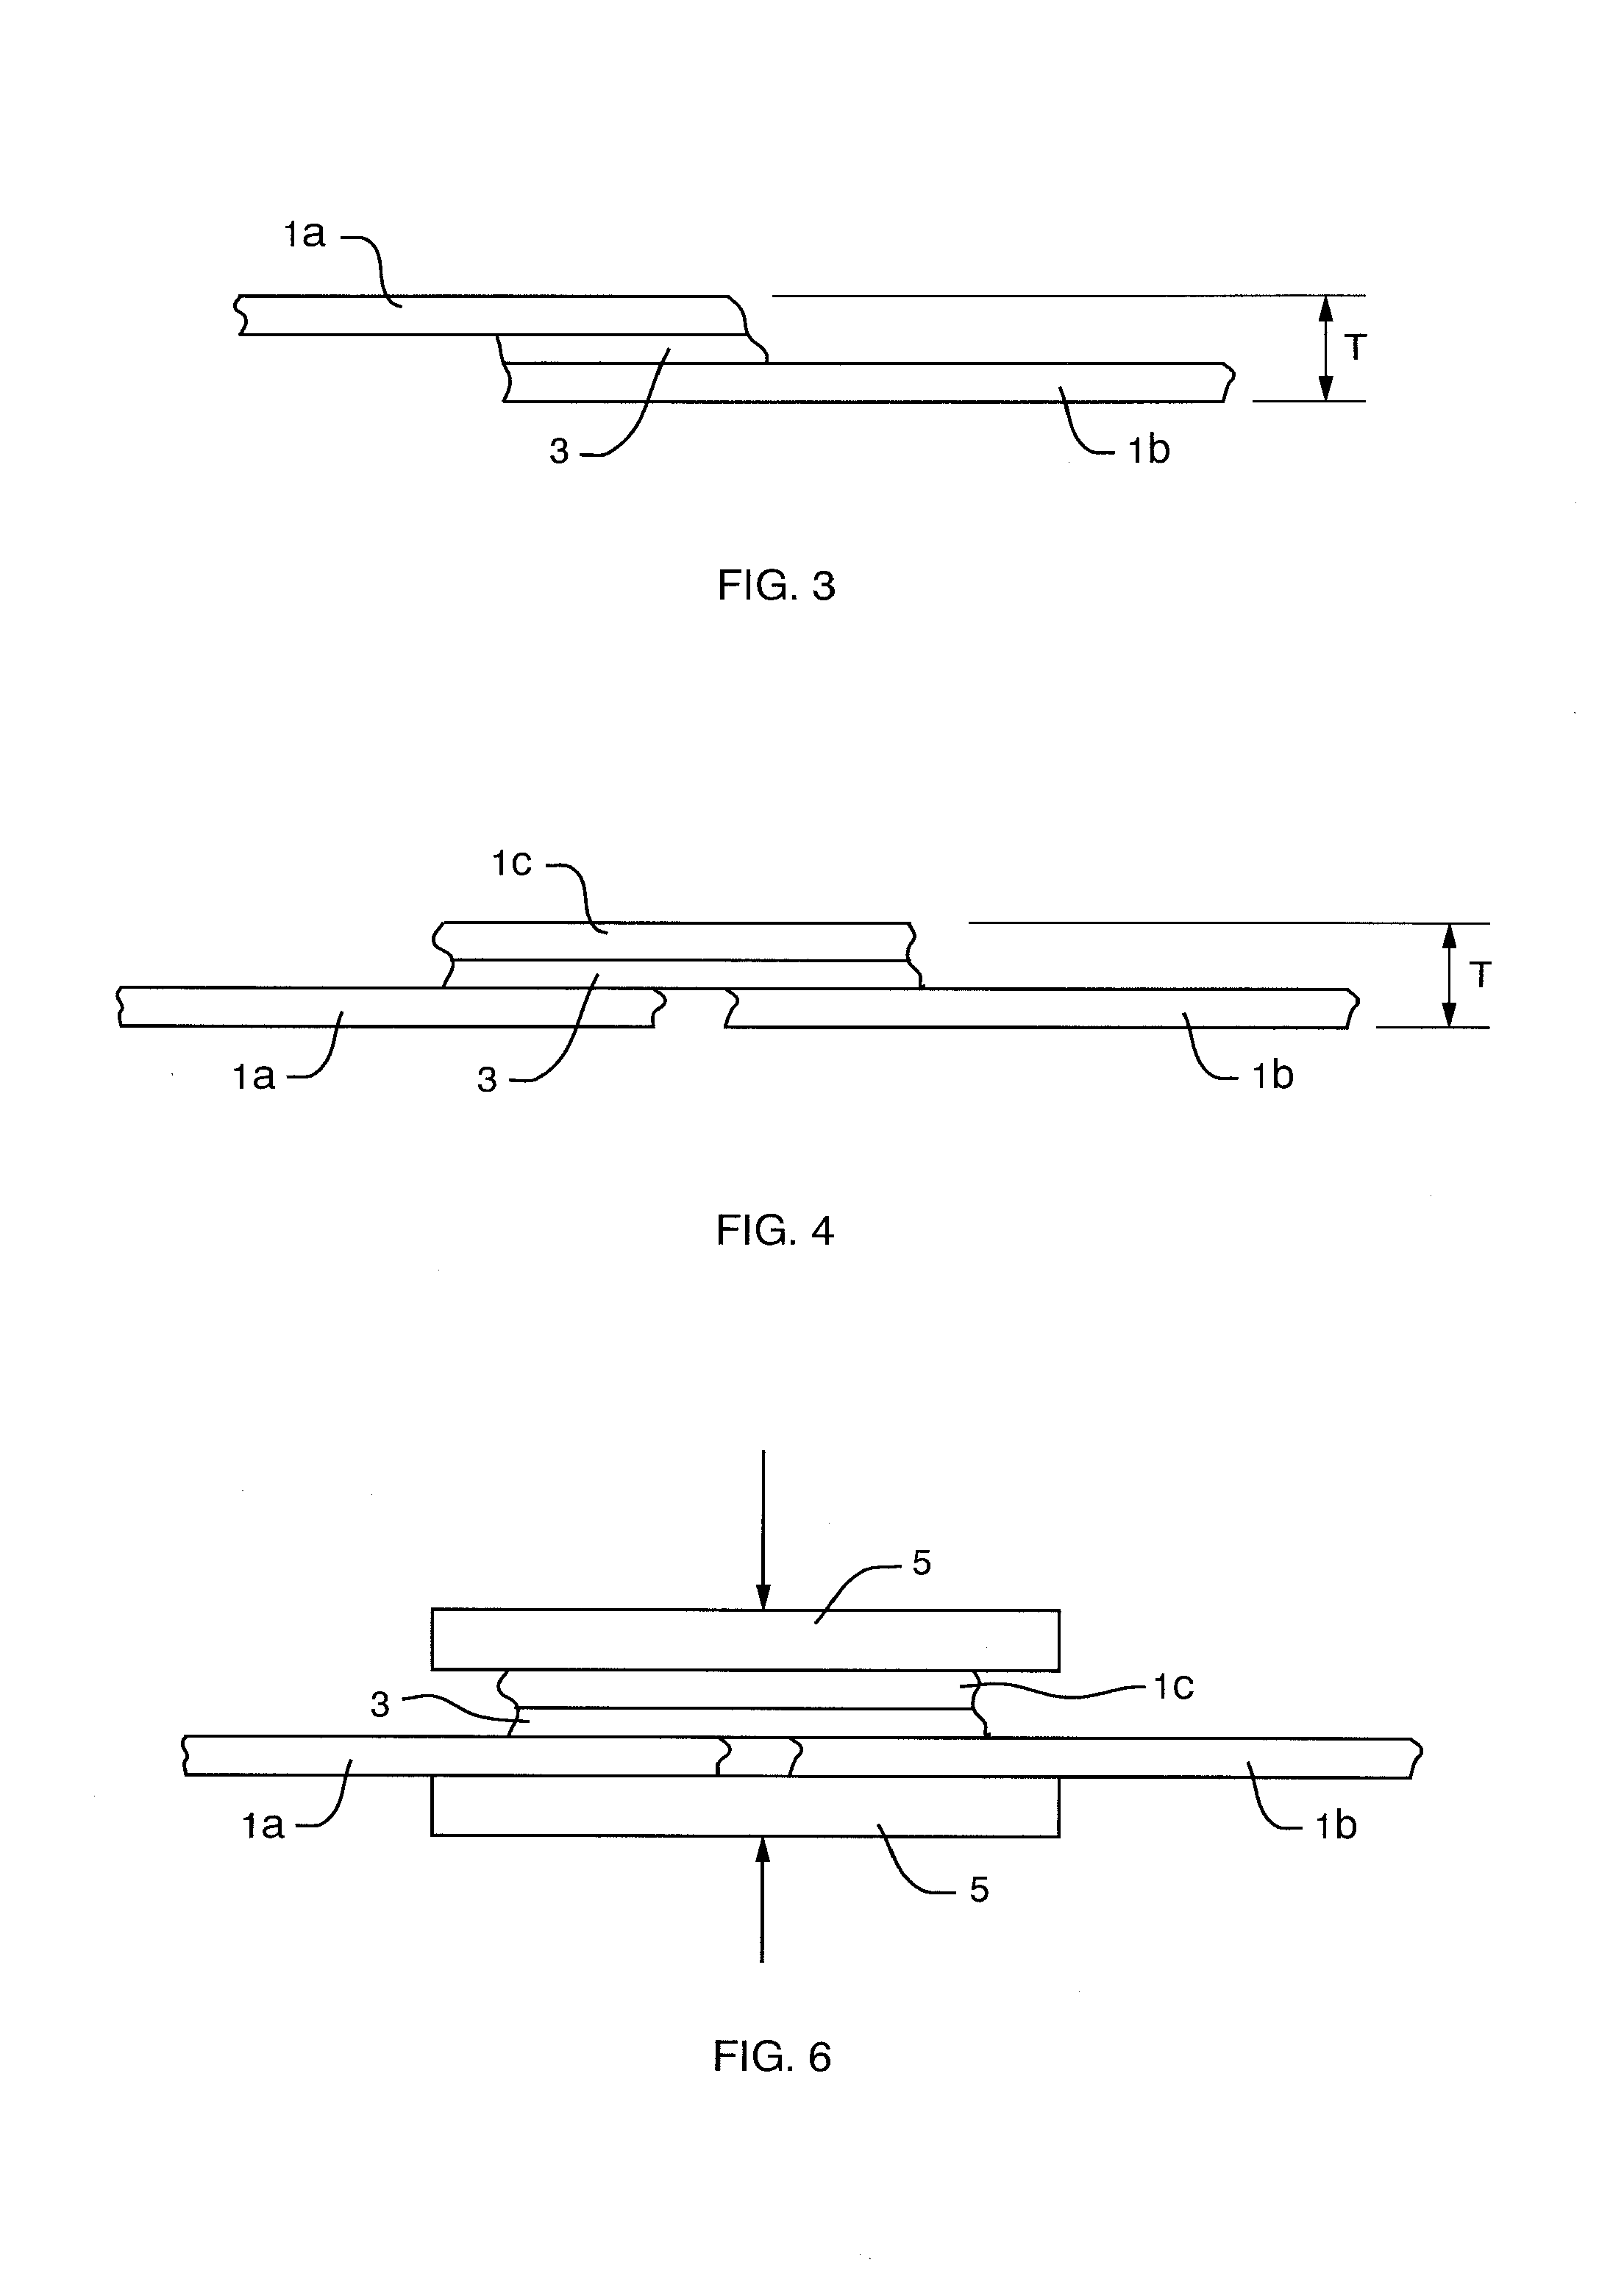 Method for making adhesive fabric joints with heat and pressure by comparing actual joint parameters to pre-calculated optimal joint parameters